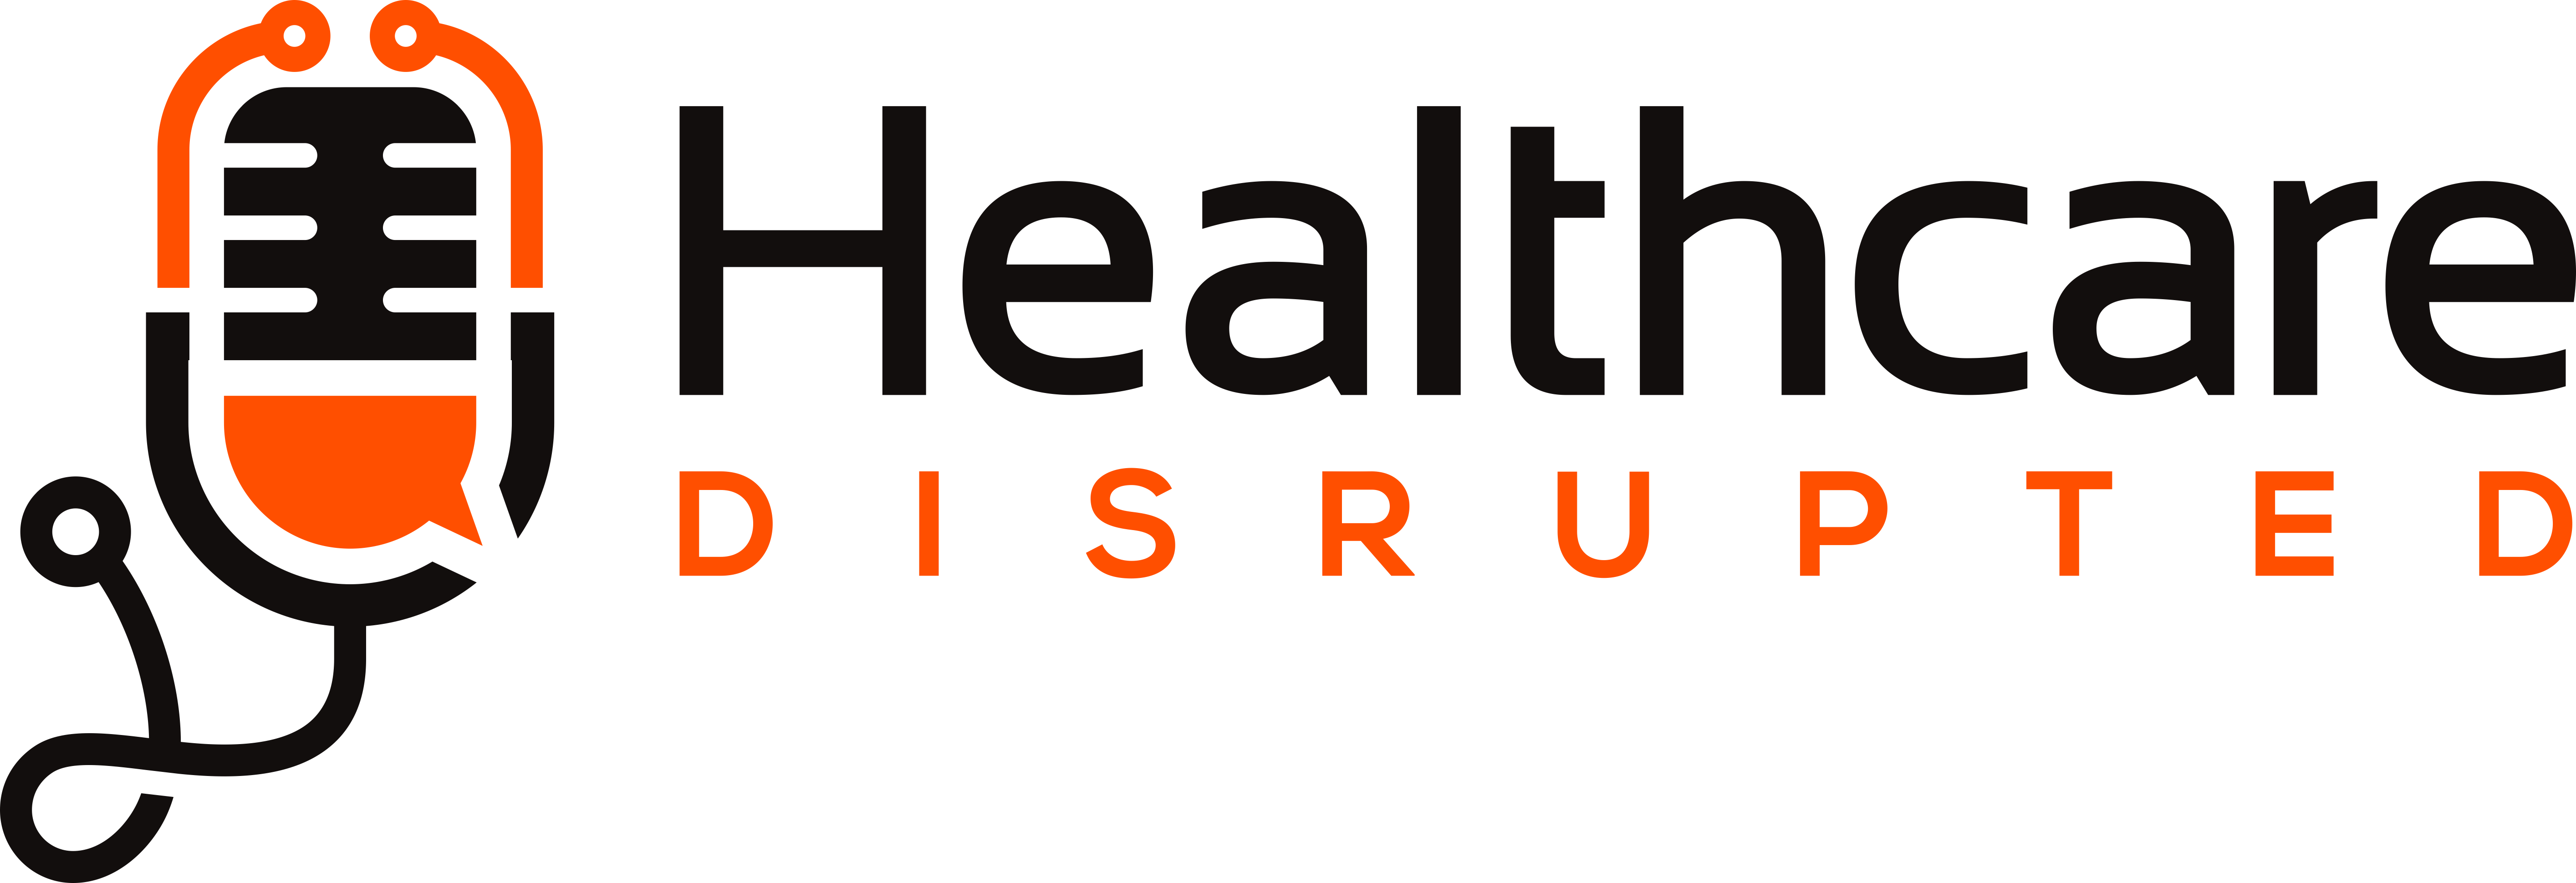 Healthcare disrupted Logo